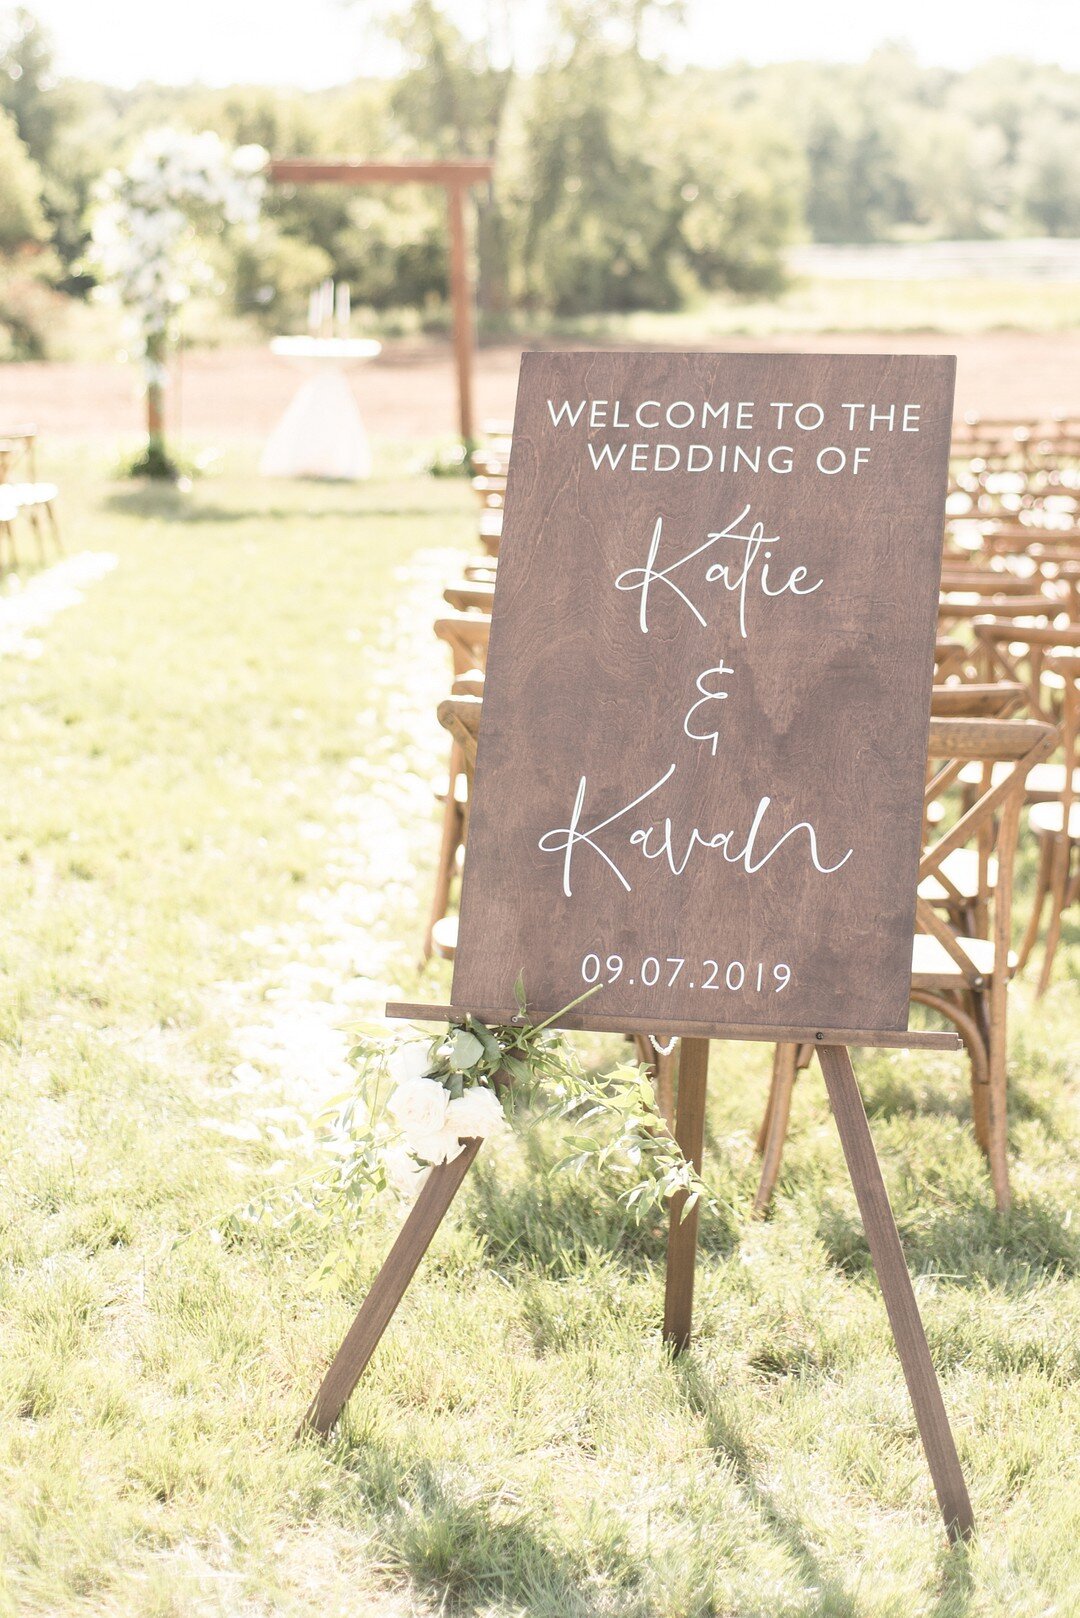 Greenery Inspired Outdoor Wedding captured by Victoria Rayburn Photography. See more outdoor wedding ideas at CHItheeWED.com! 